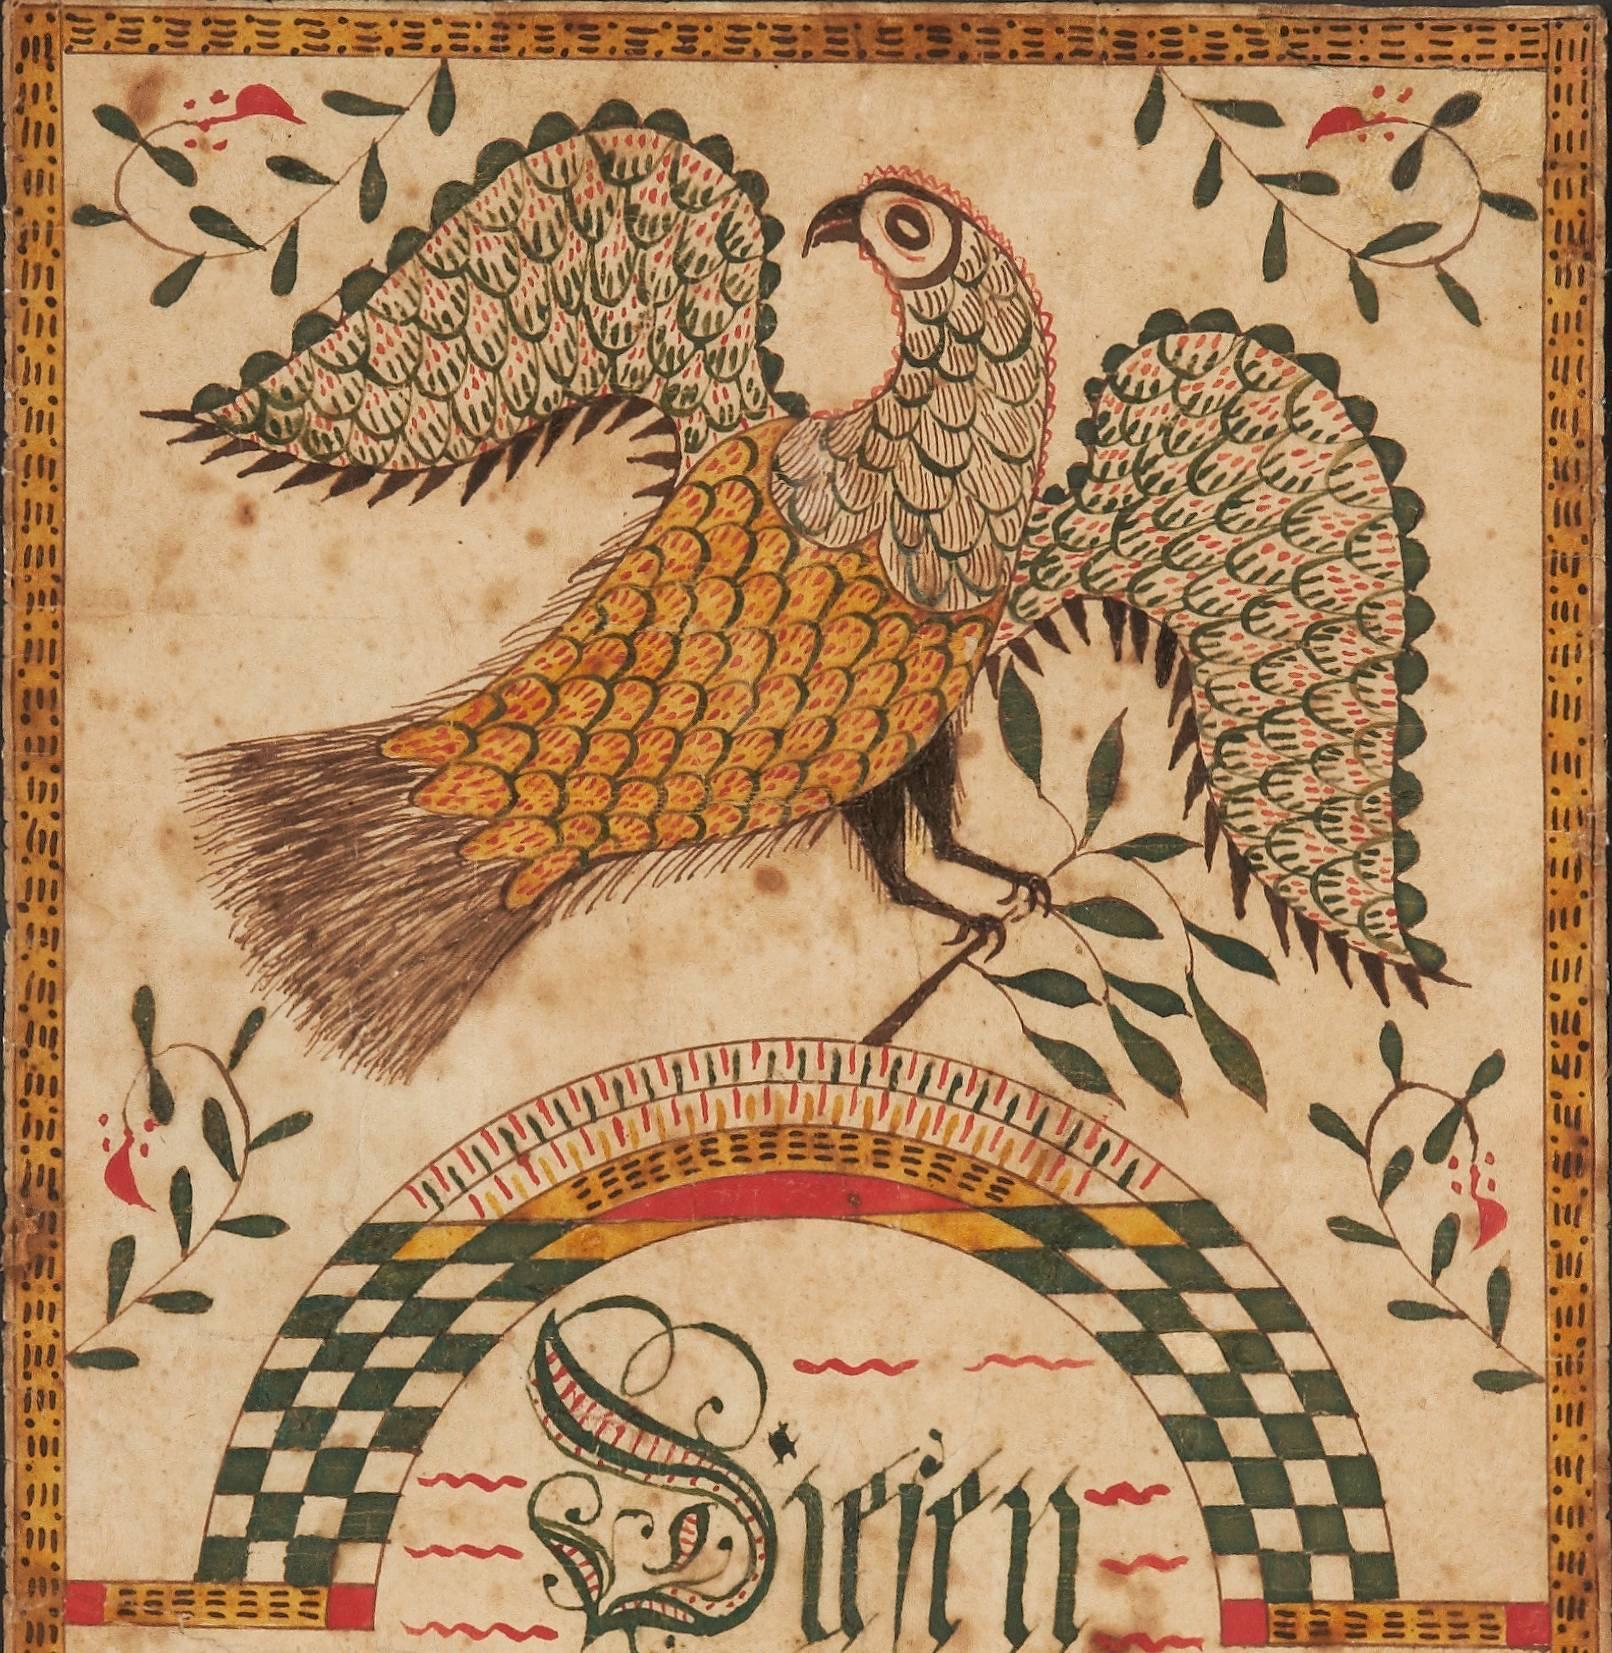 Depicting a spread wing eagle holding a leafy branch above a decorated arc, this fraktur is attributed to the Northampton County Artist (active circa 1816-1837), Upper Milford Township Northampton County, Pennsylvania and is dated 